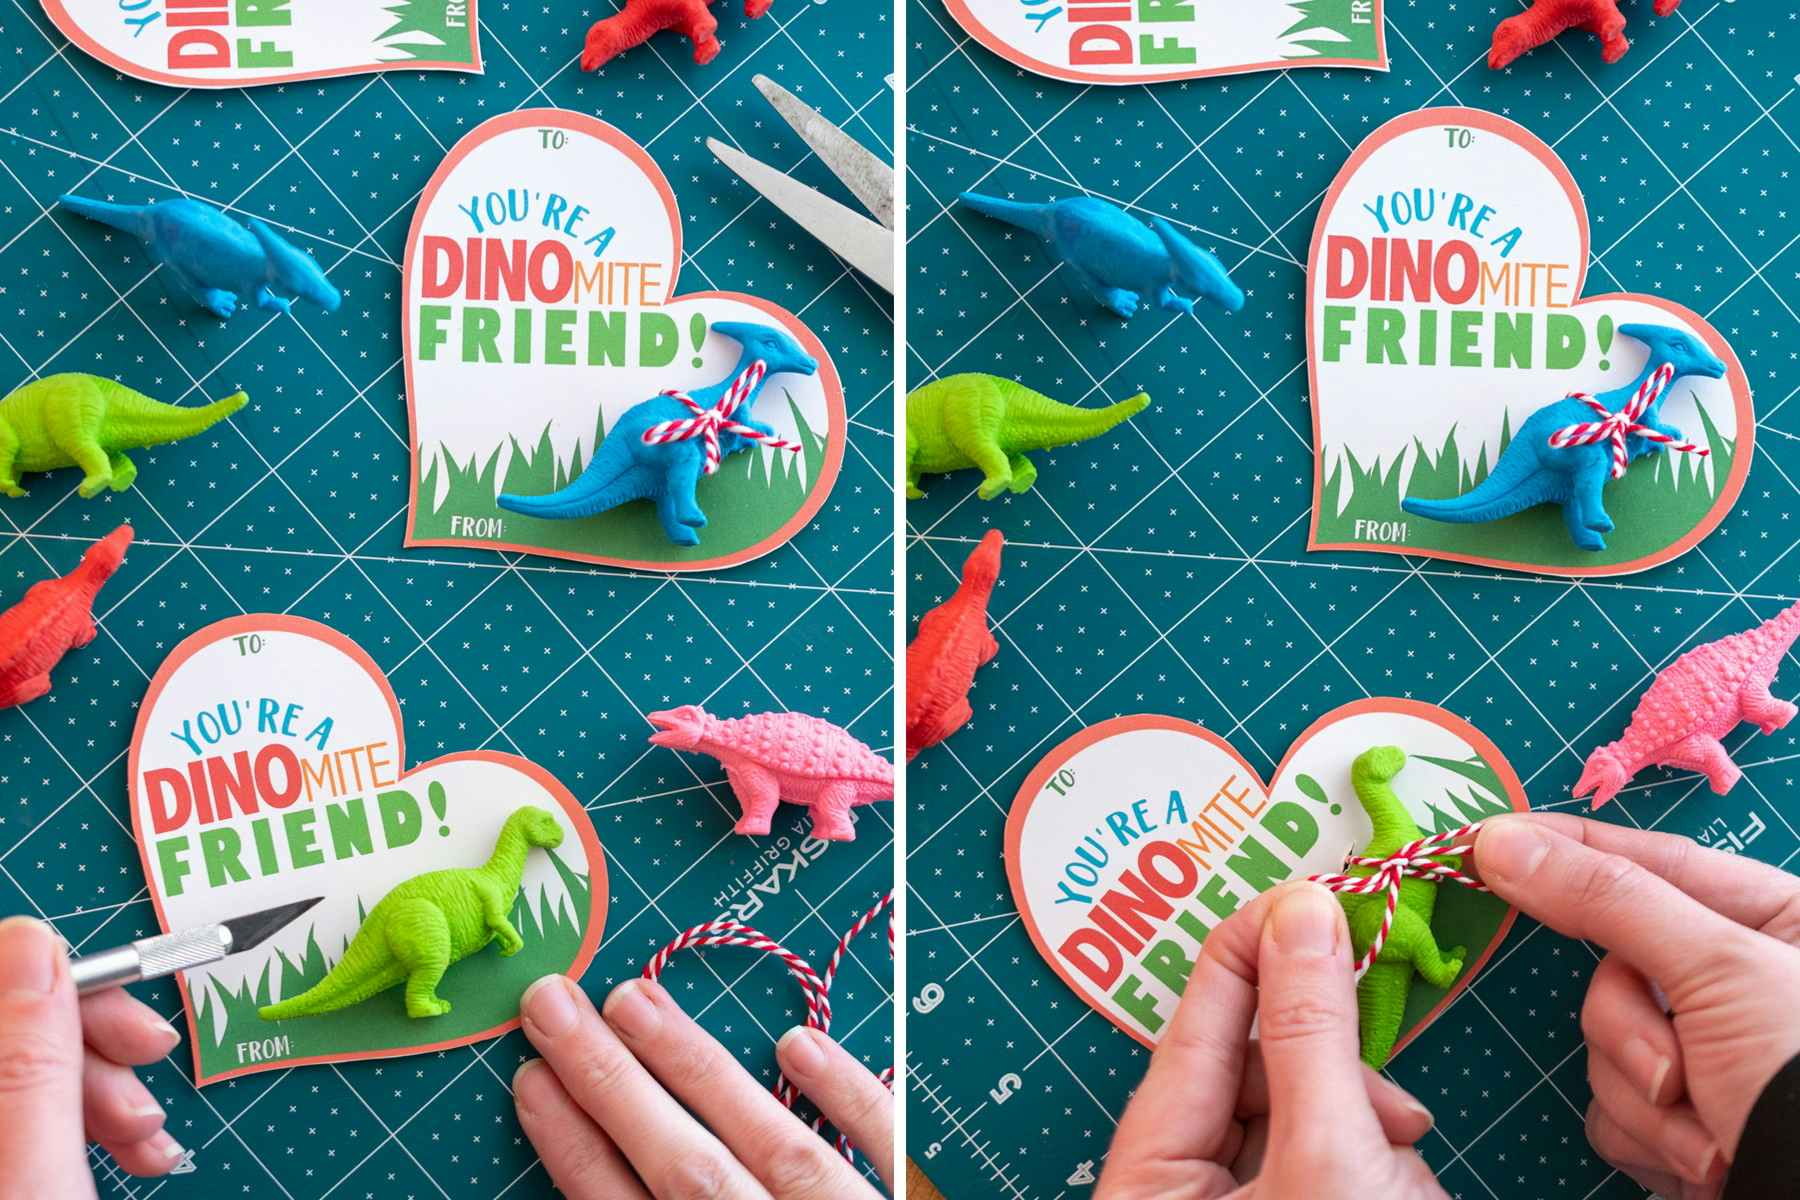 someone holding exacto knife next to youre a dinomite friend card and tying a toy dinosaur to it